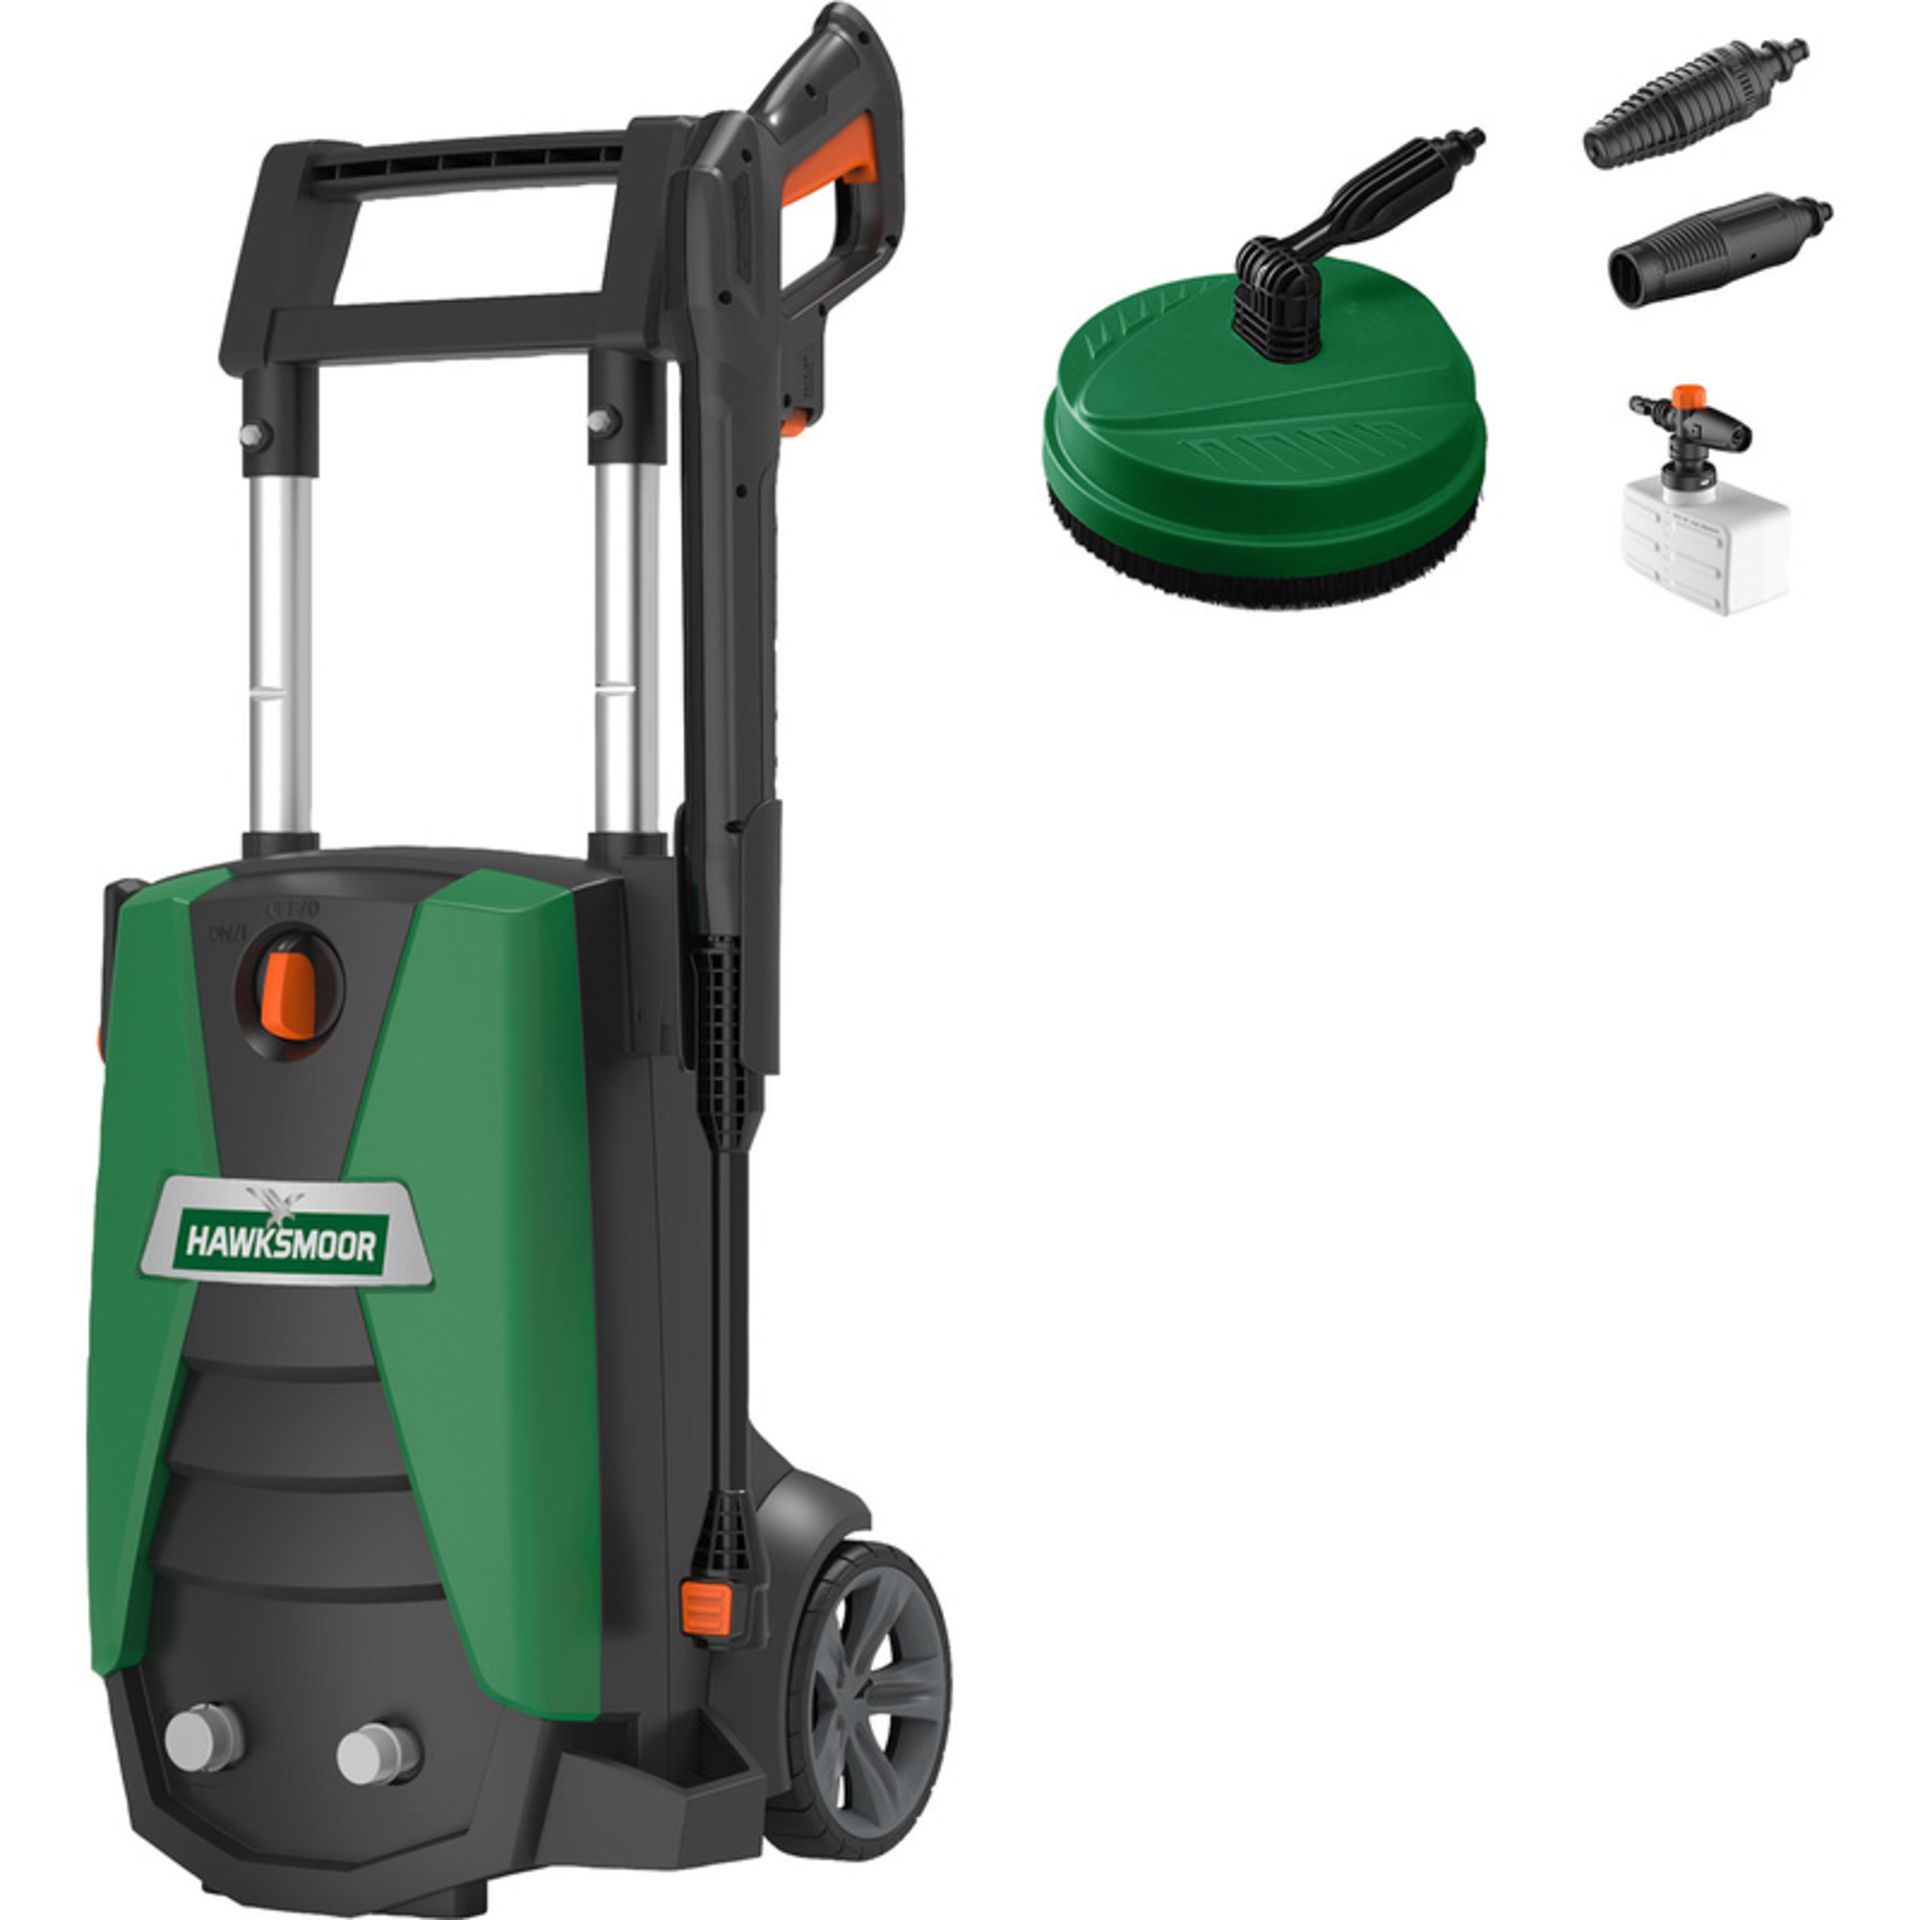 5 x Hawksmoor High Pressure Washer 140bar. - ER32. Compact design with space-saving integrated